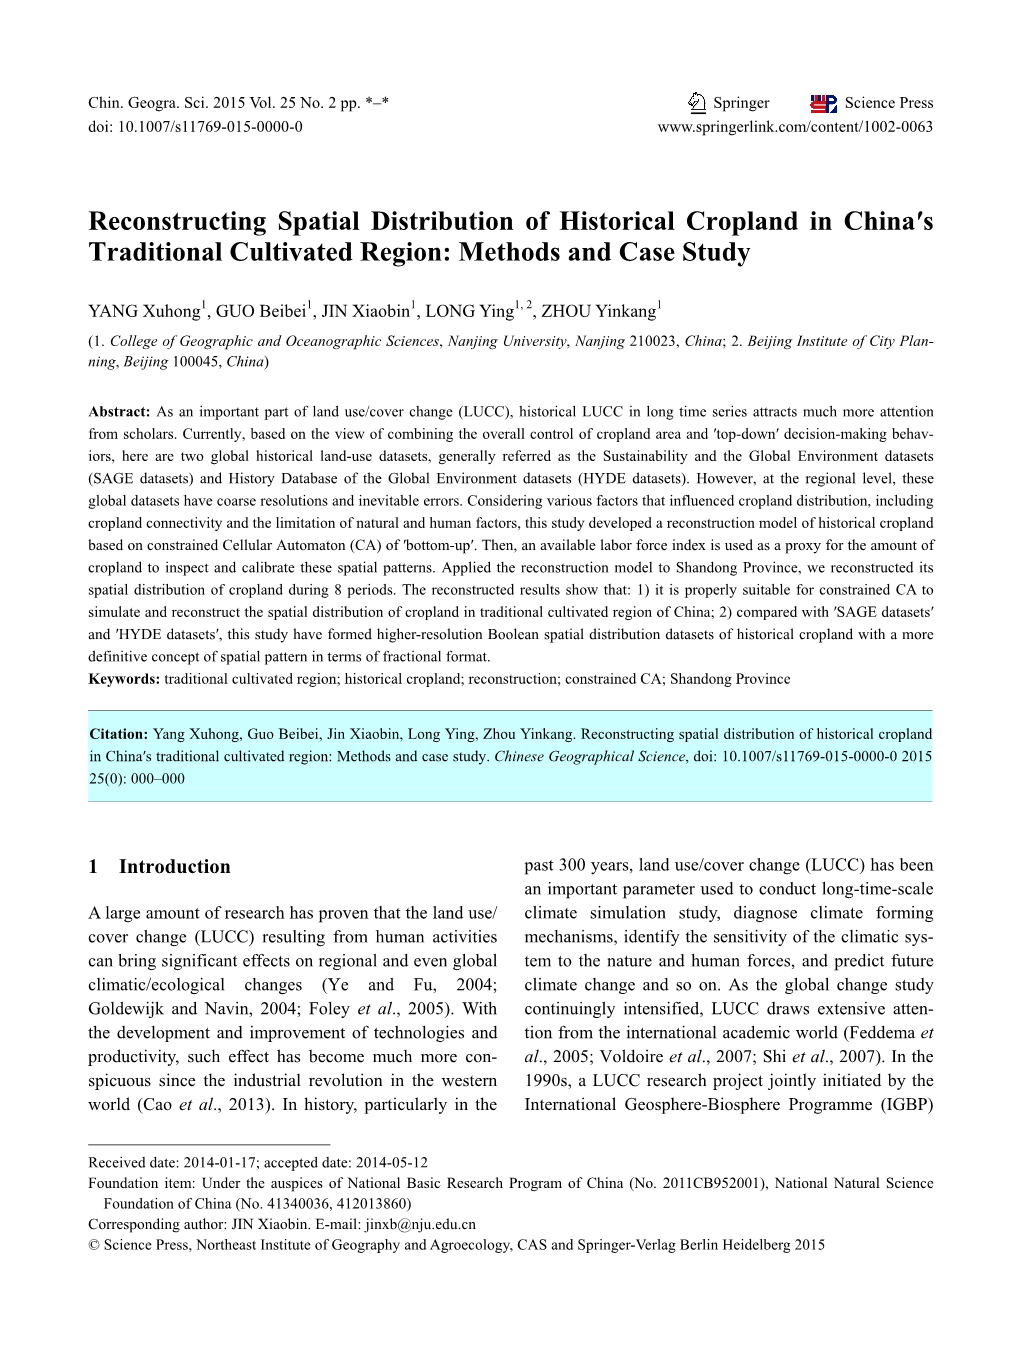 Reconstructing Spatial Distribution of Historical Cropland in China′S Traditional Cultivated Region: Methods and Case Study